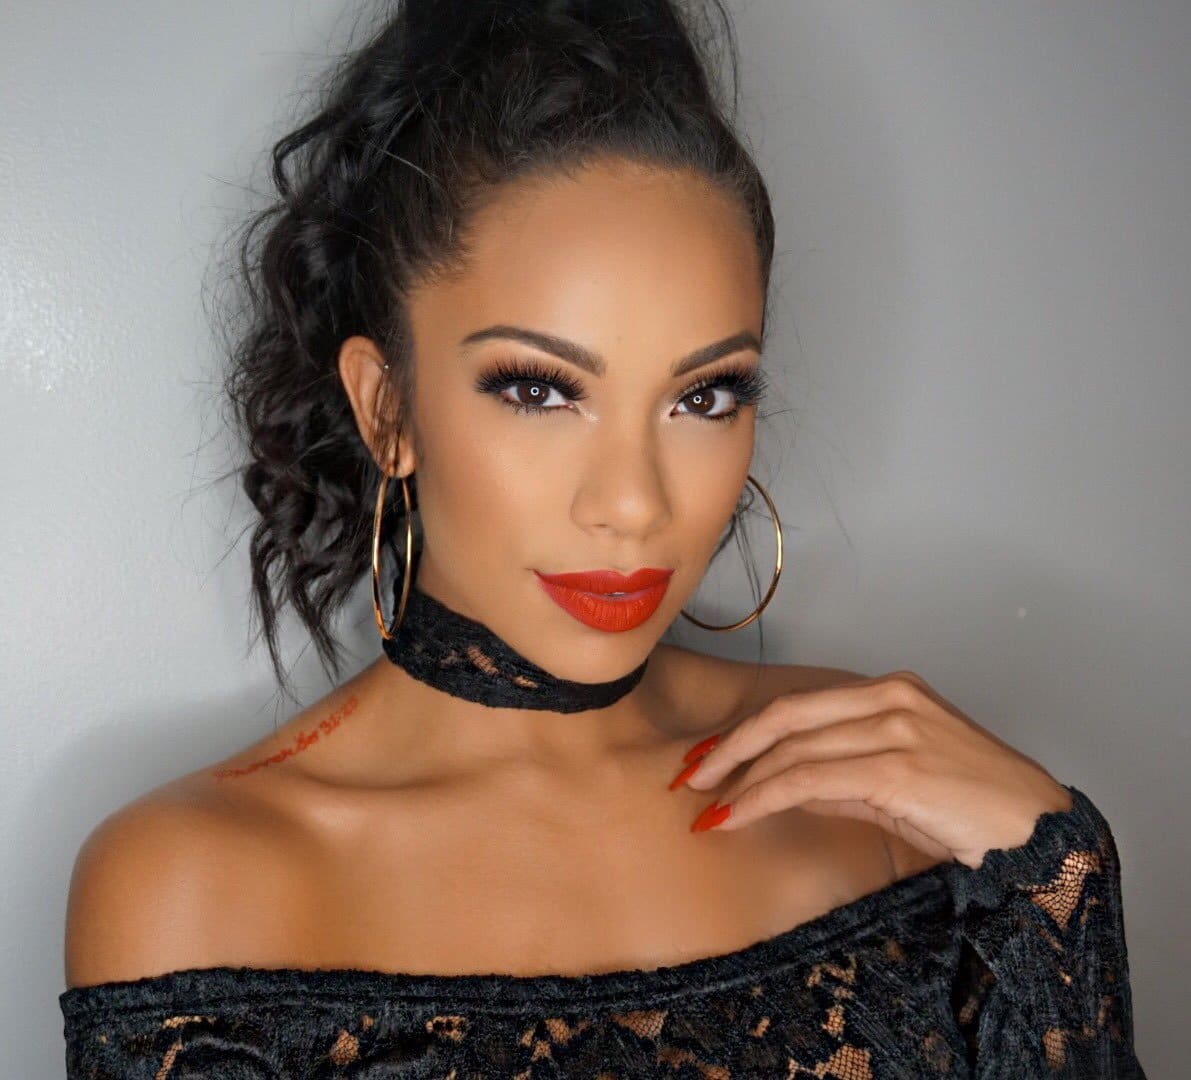 Erica Mena Shows Fans A Bit Too Much In This Photo, But They Don't Mind!